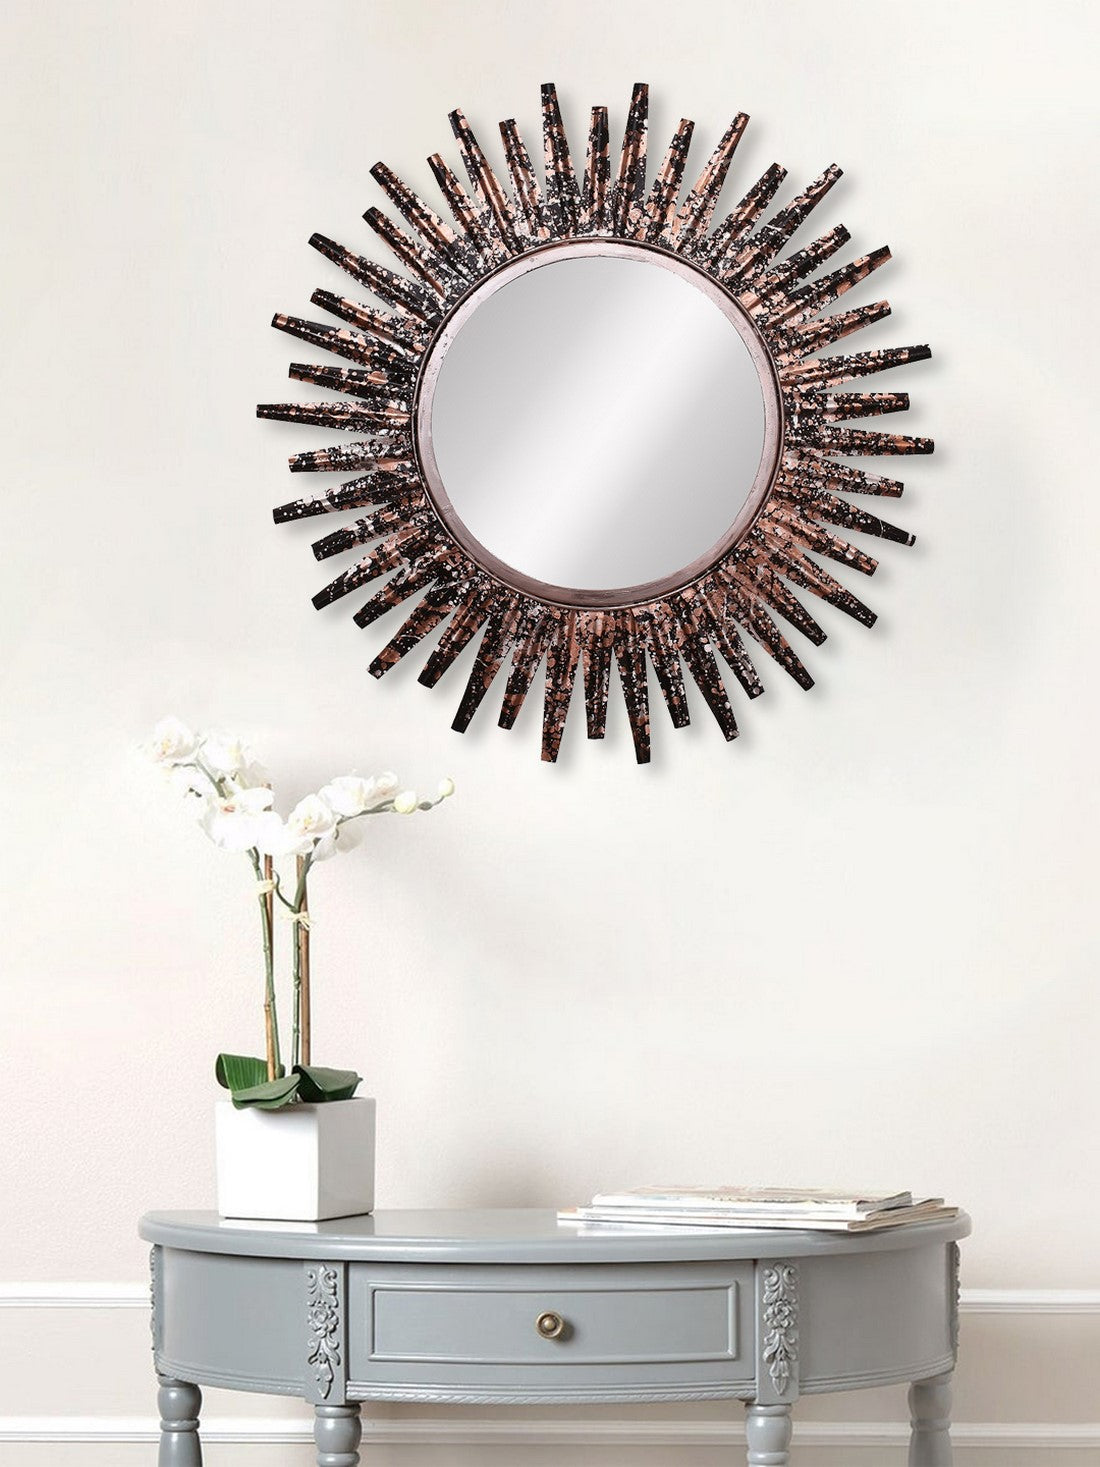 Brown, Copper and Black Decorative Metal Handcarved Wall Mirror